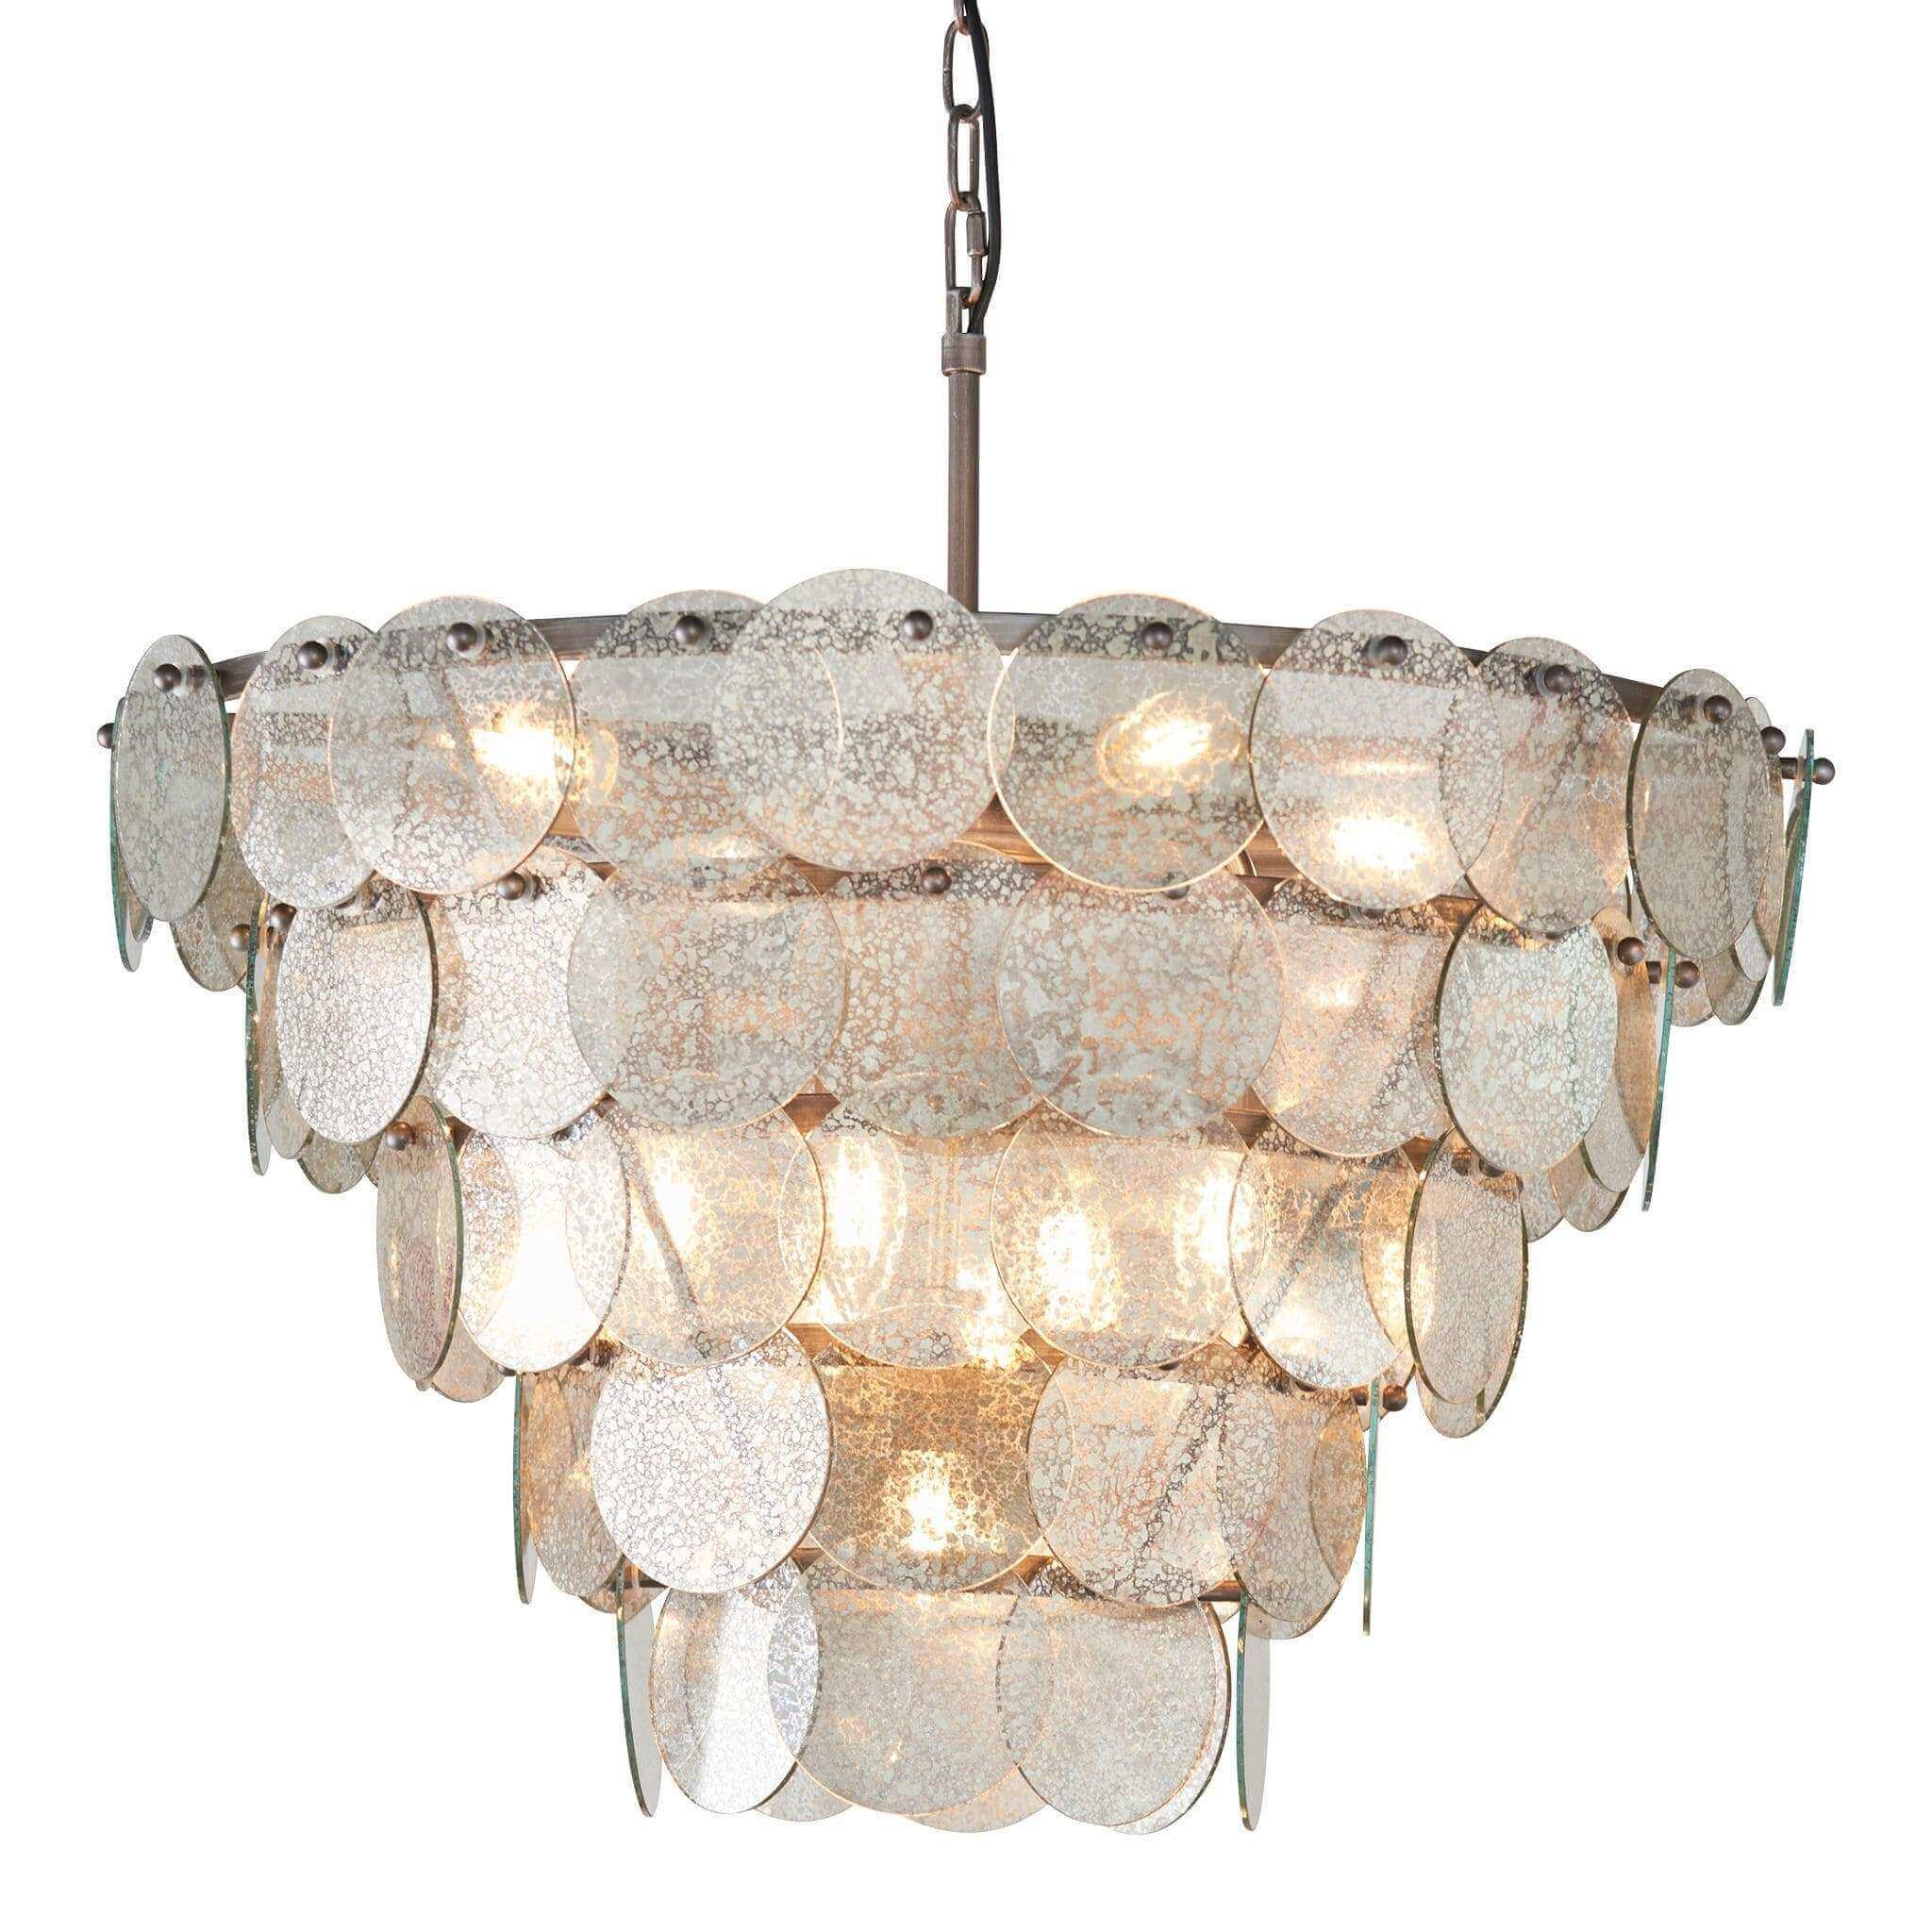 Orn Medallion Chandelier - escapologyhome.co.uk